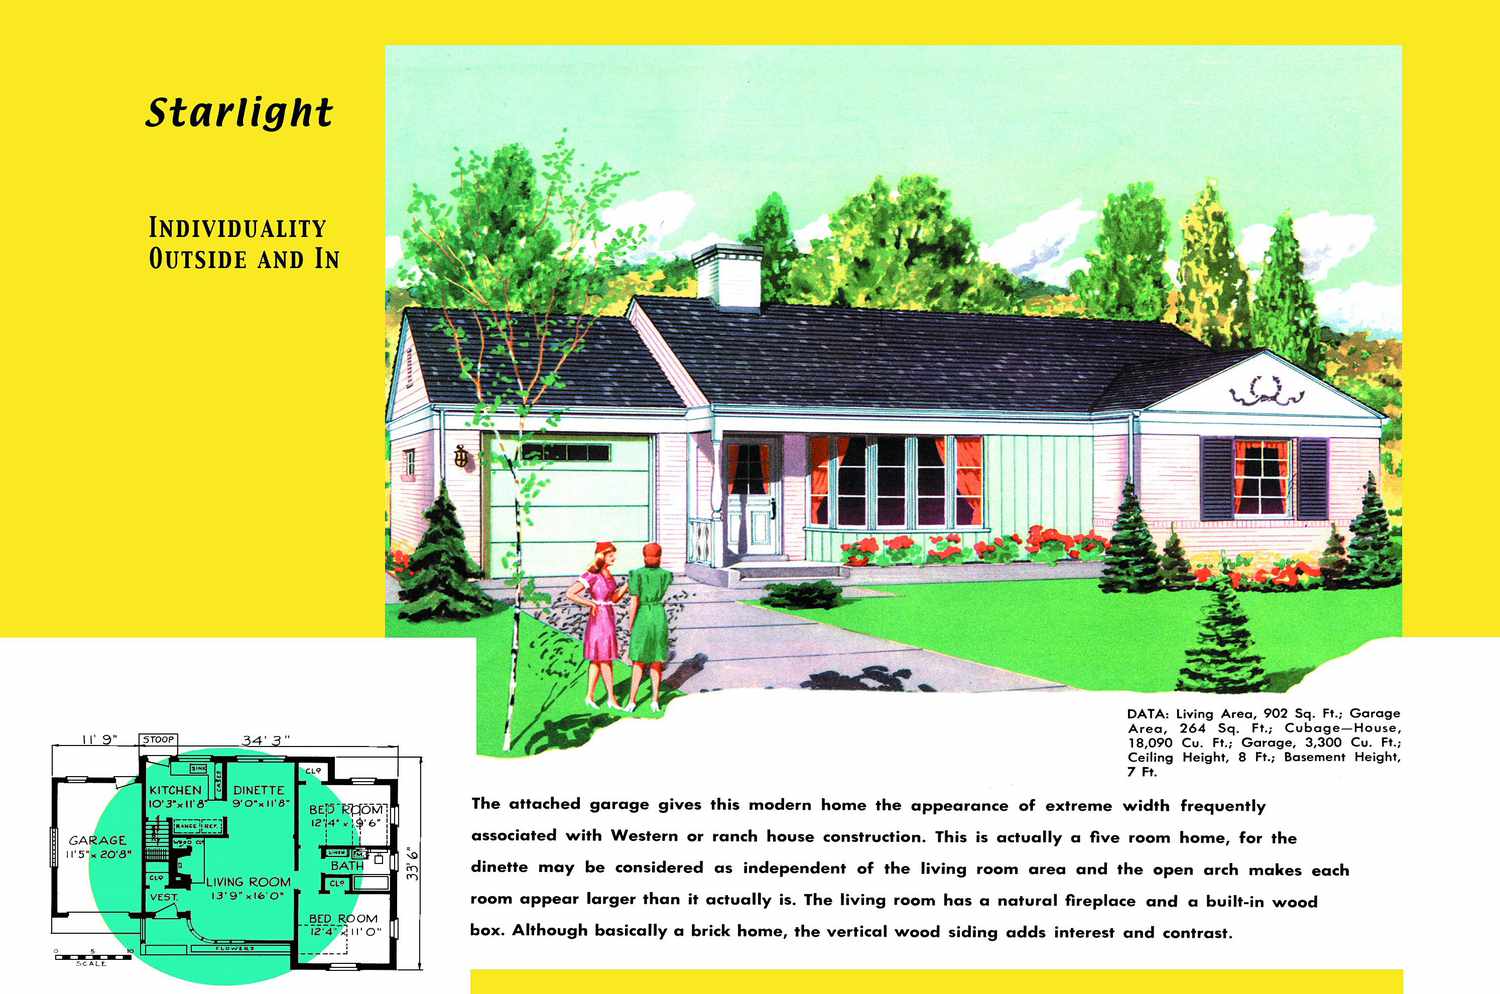 1950s floor plan and rendering of ranch-style house called Starlight with attached garage